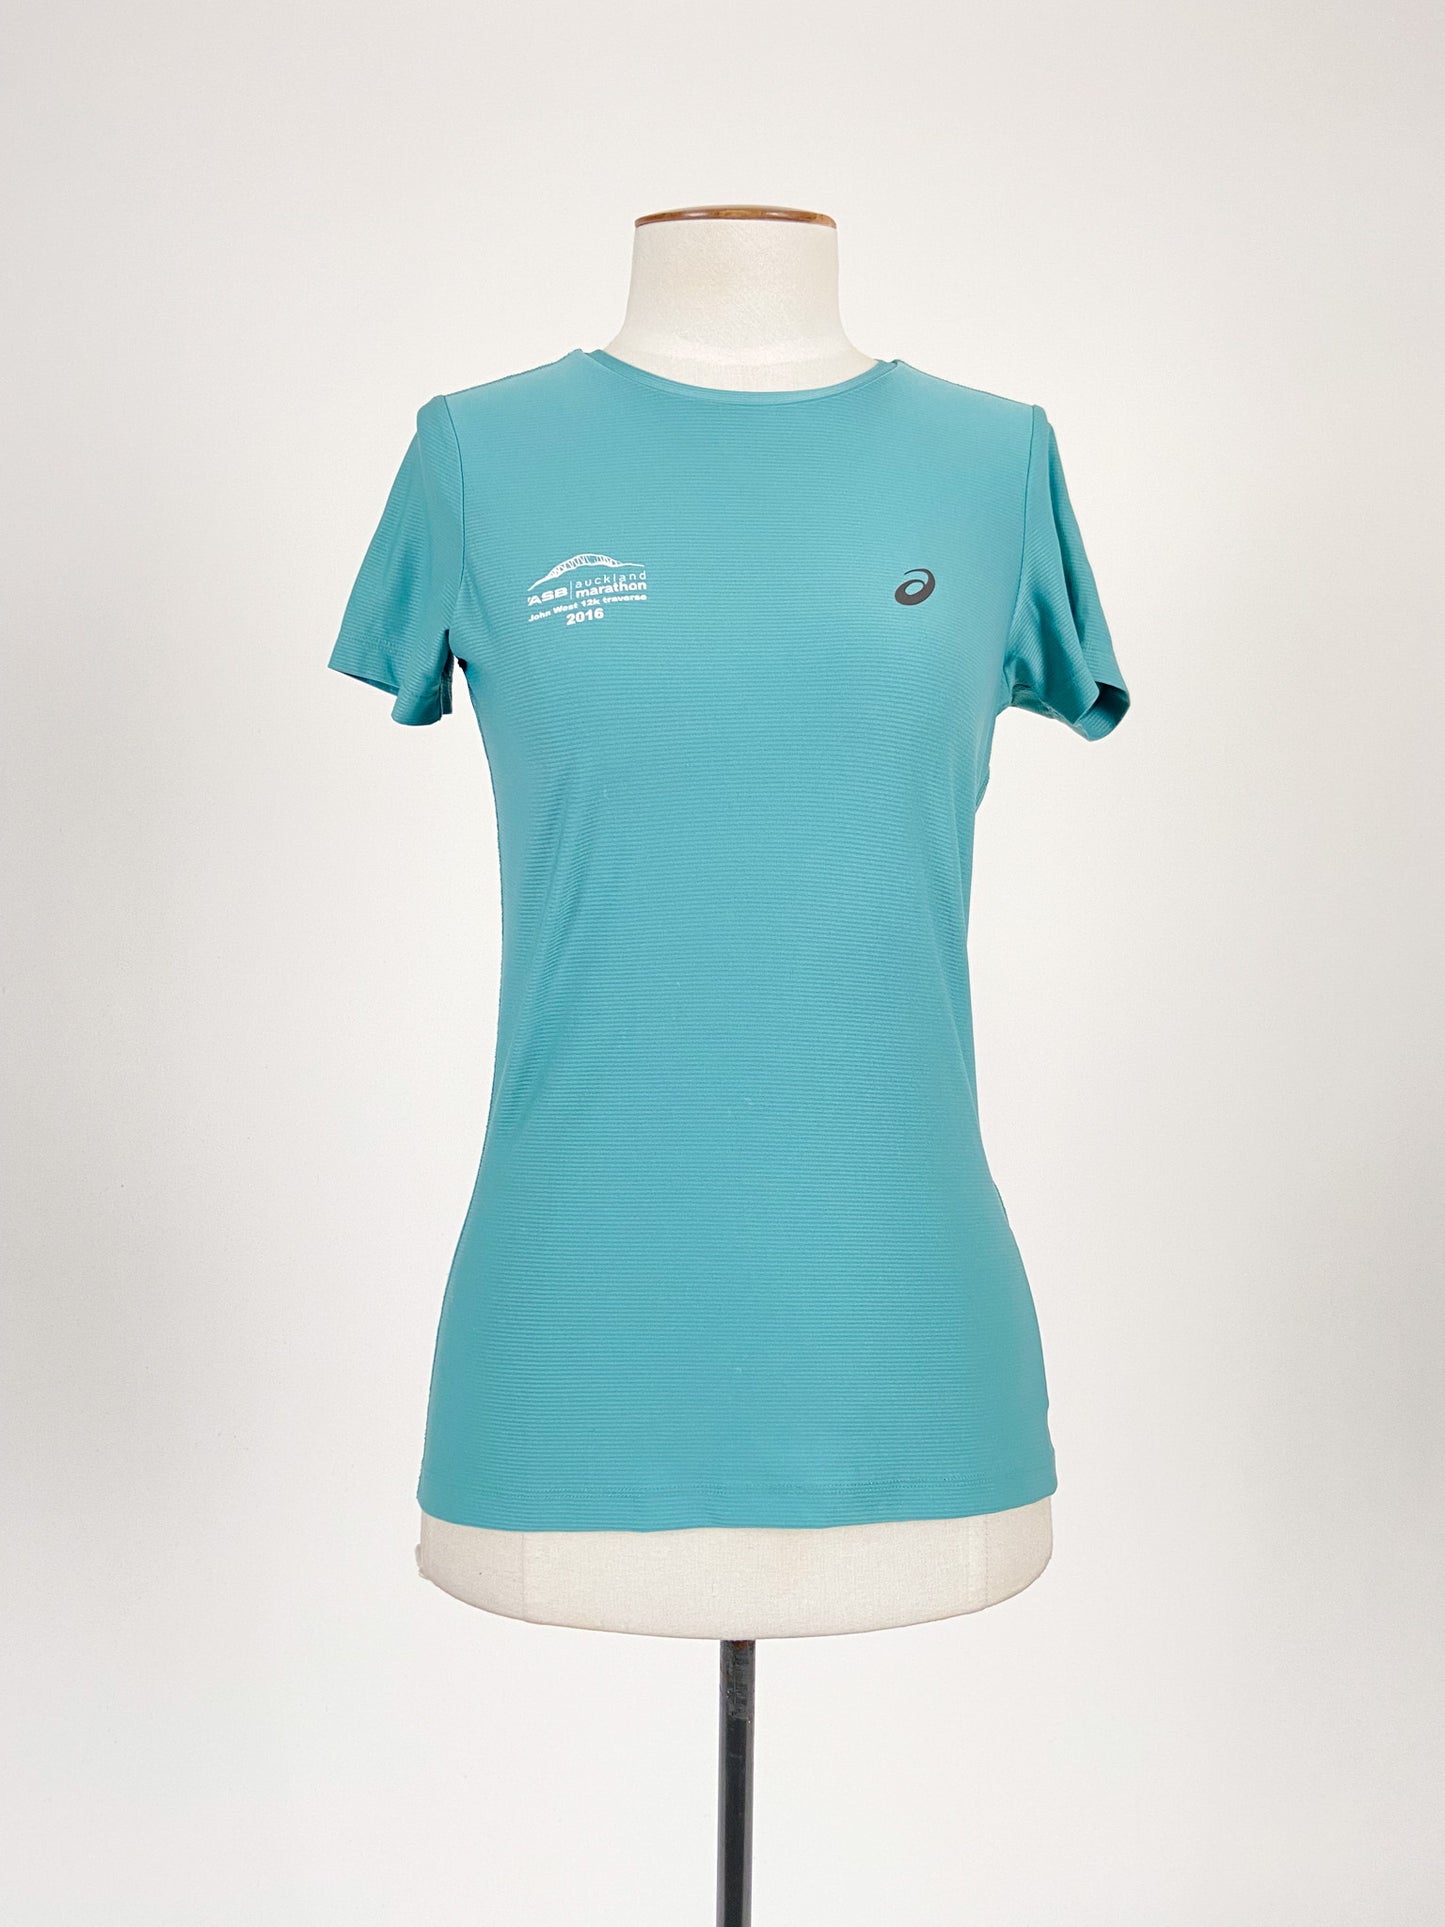 Asics | Blue Casual Activewear Top | Size S